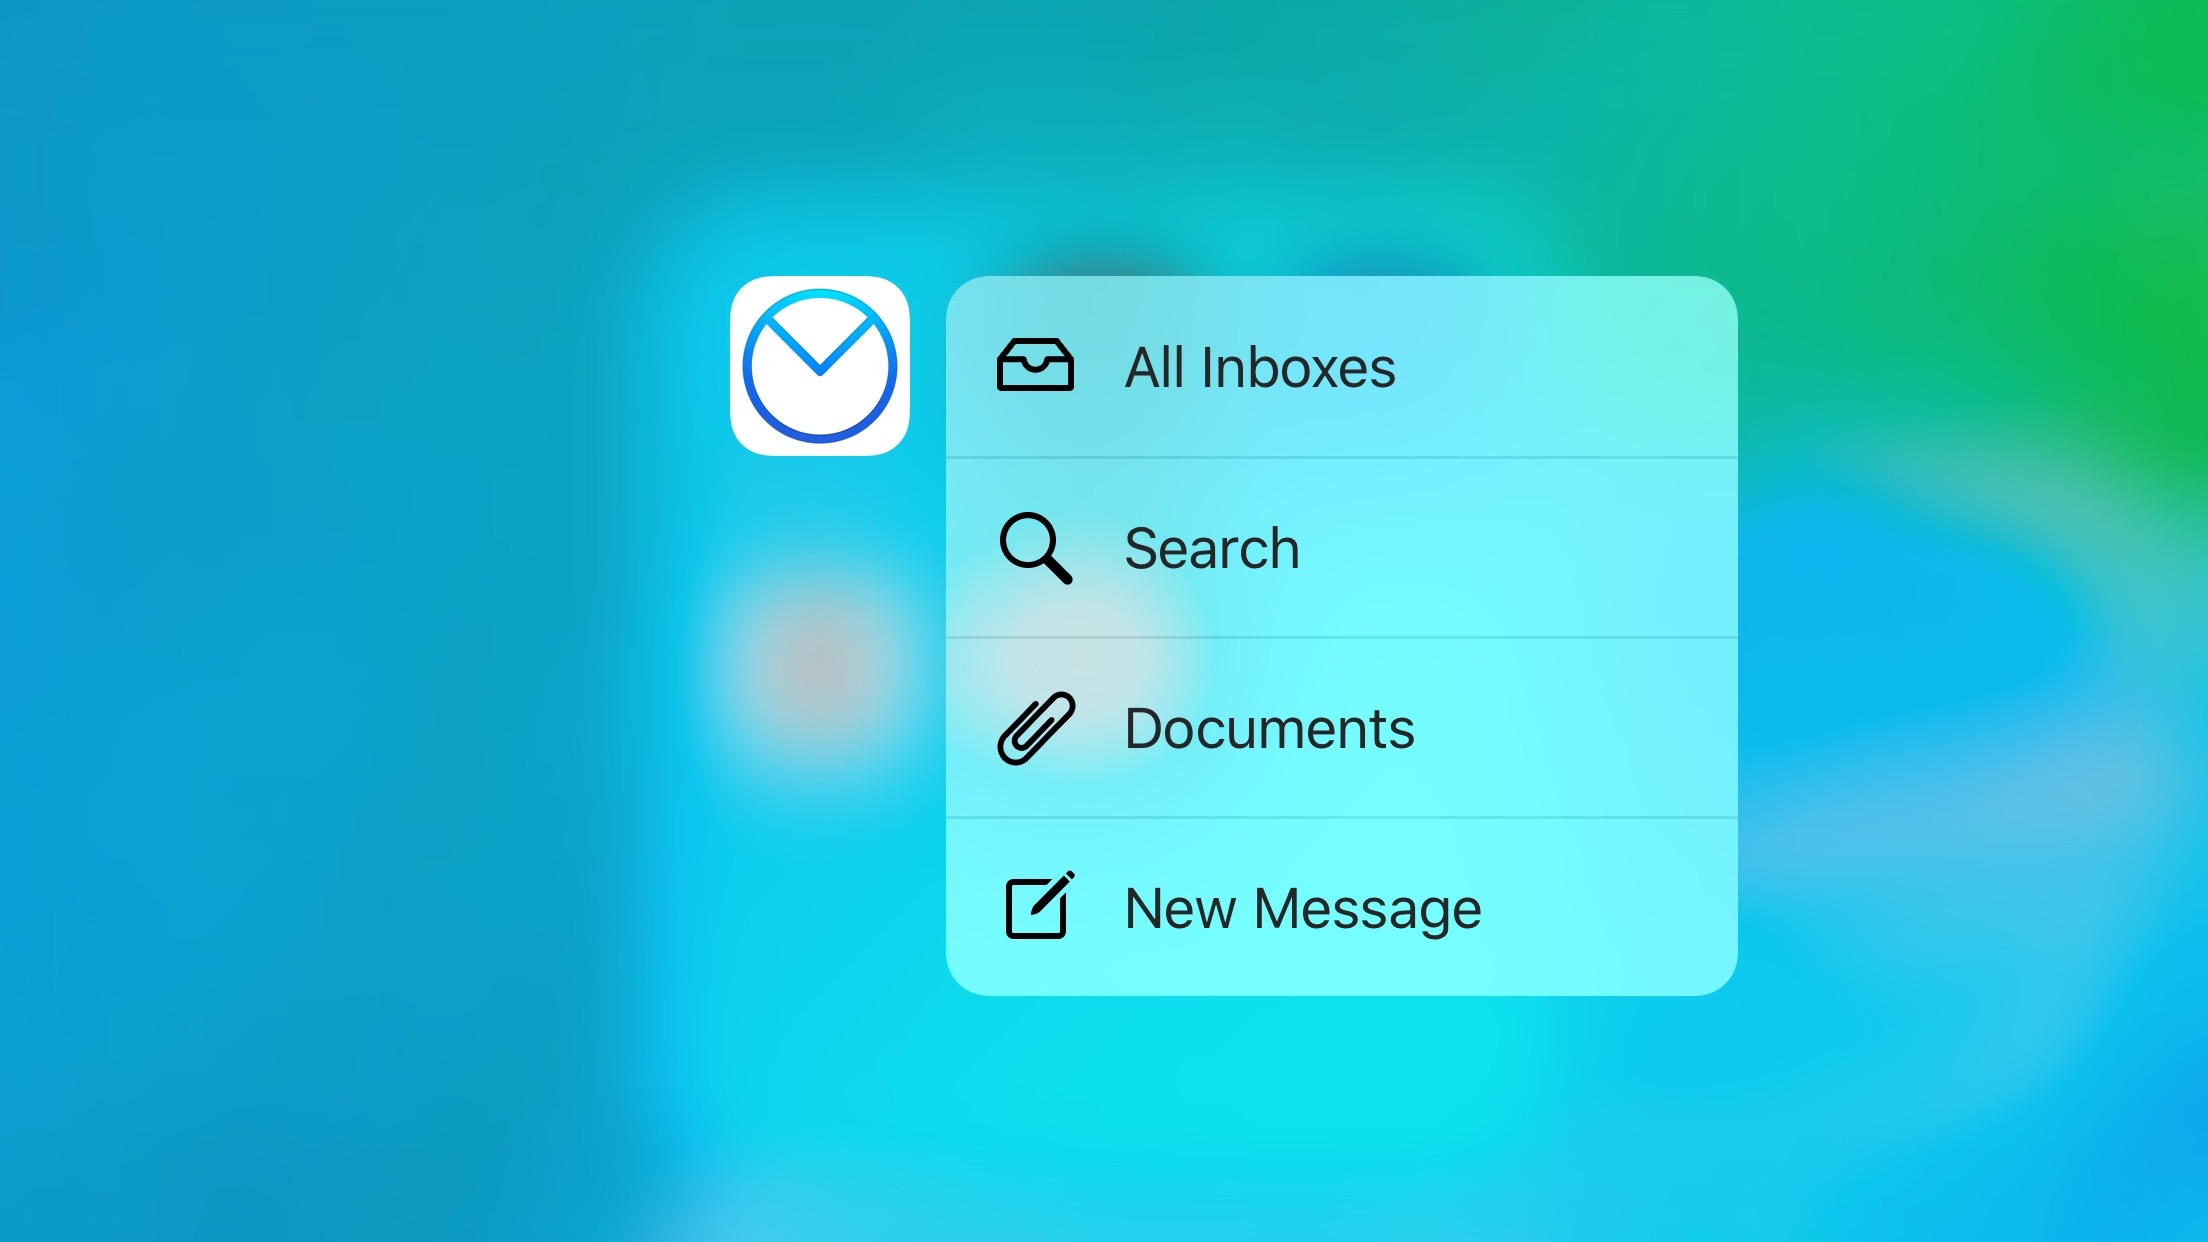 instal the last version for apple Airmail 5